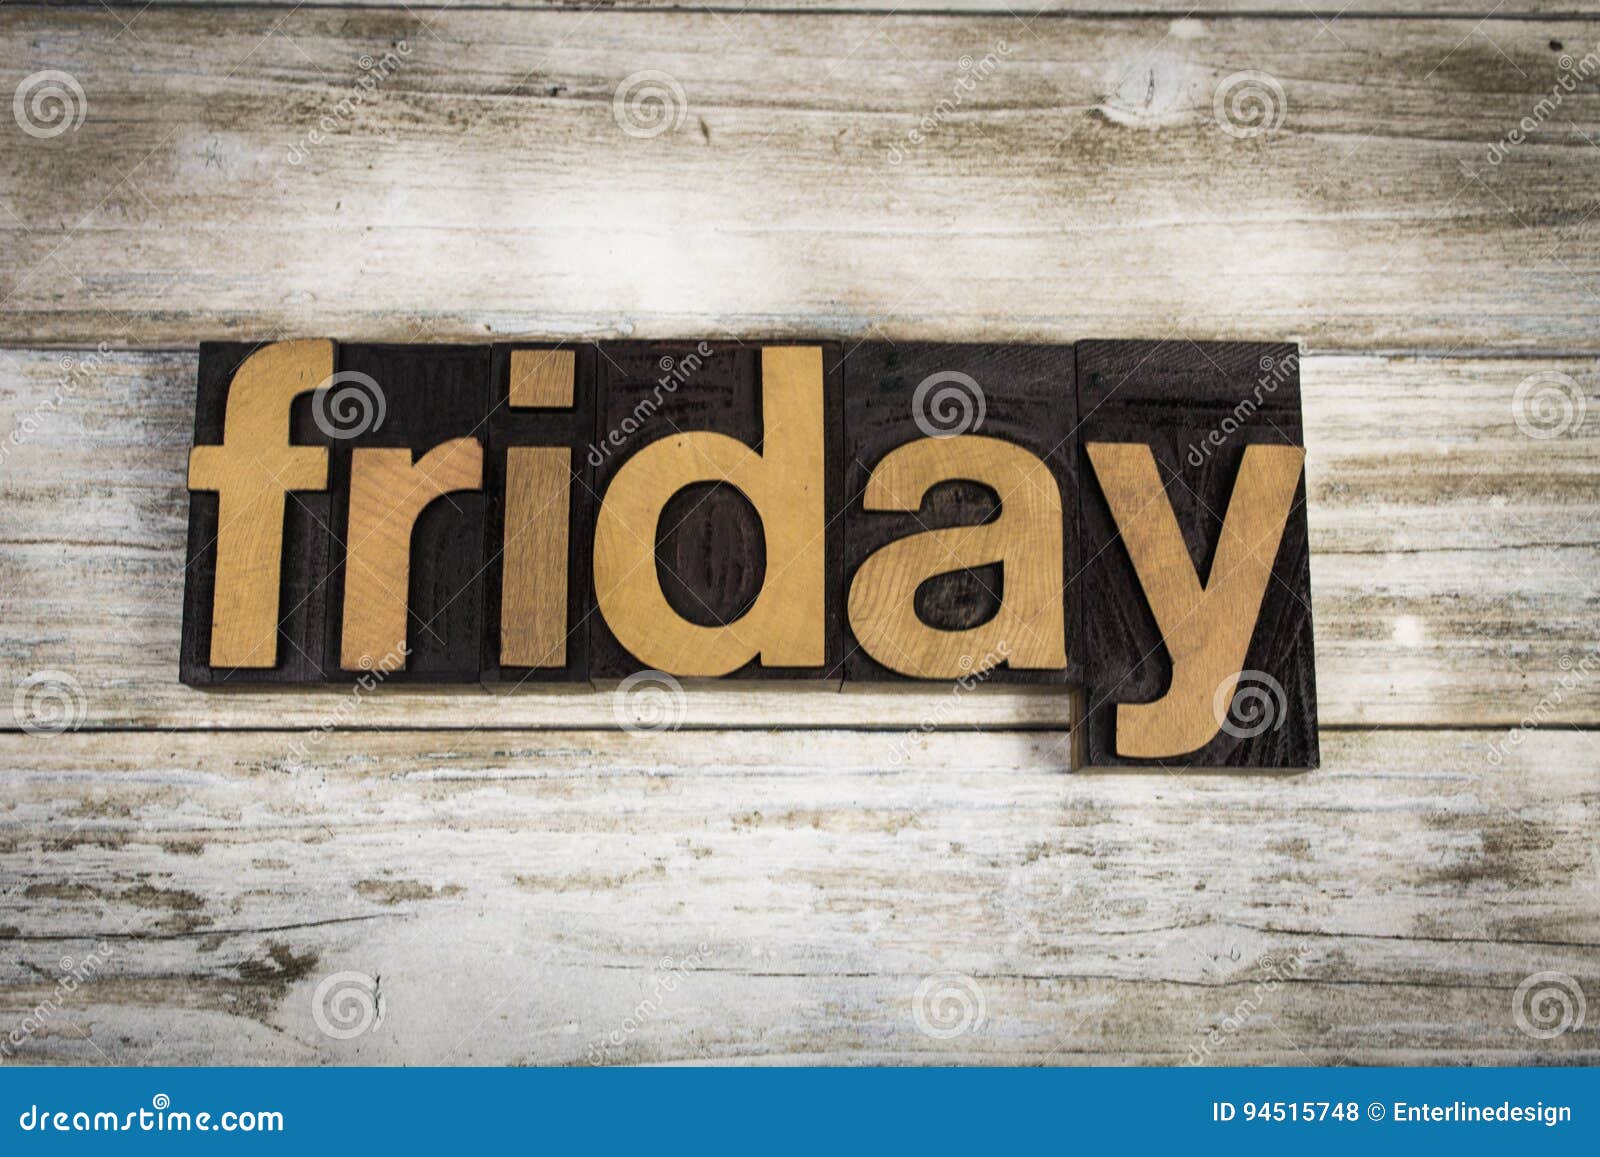 Friday Letterpress Word on Wooden Background Stock Photo - Image of ...